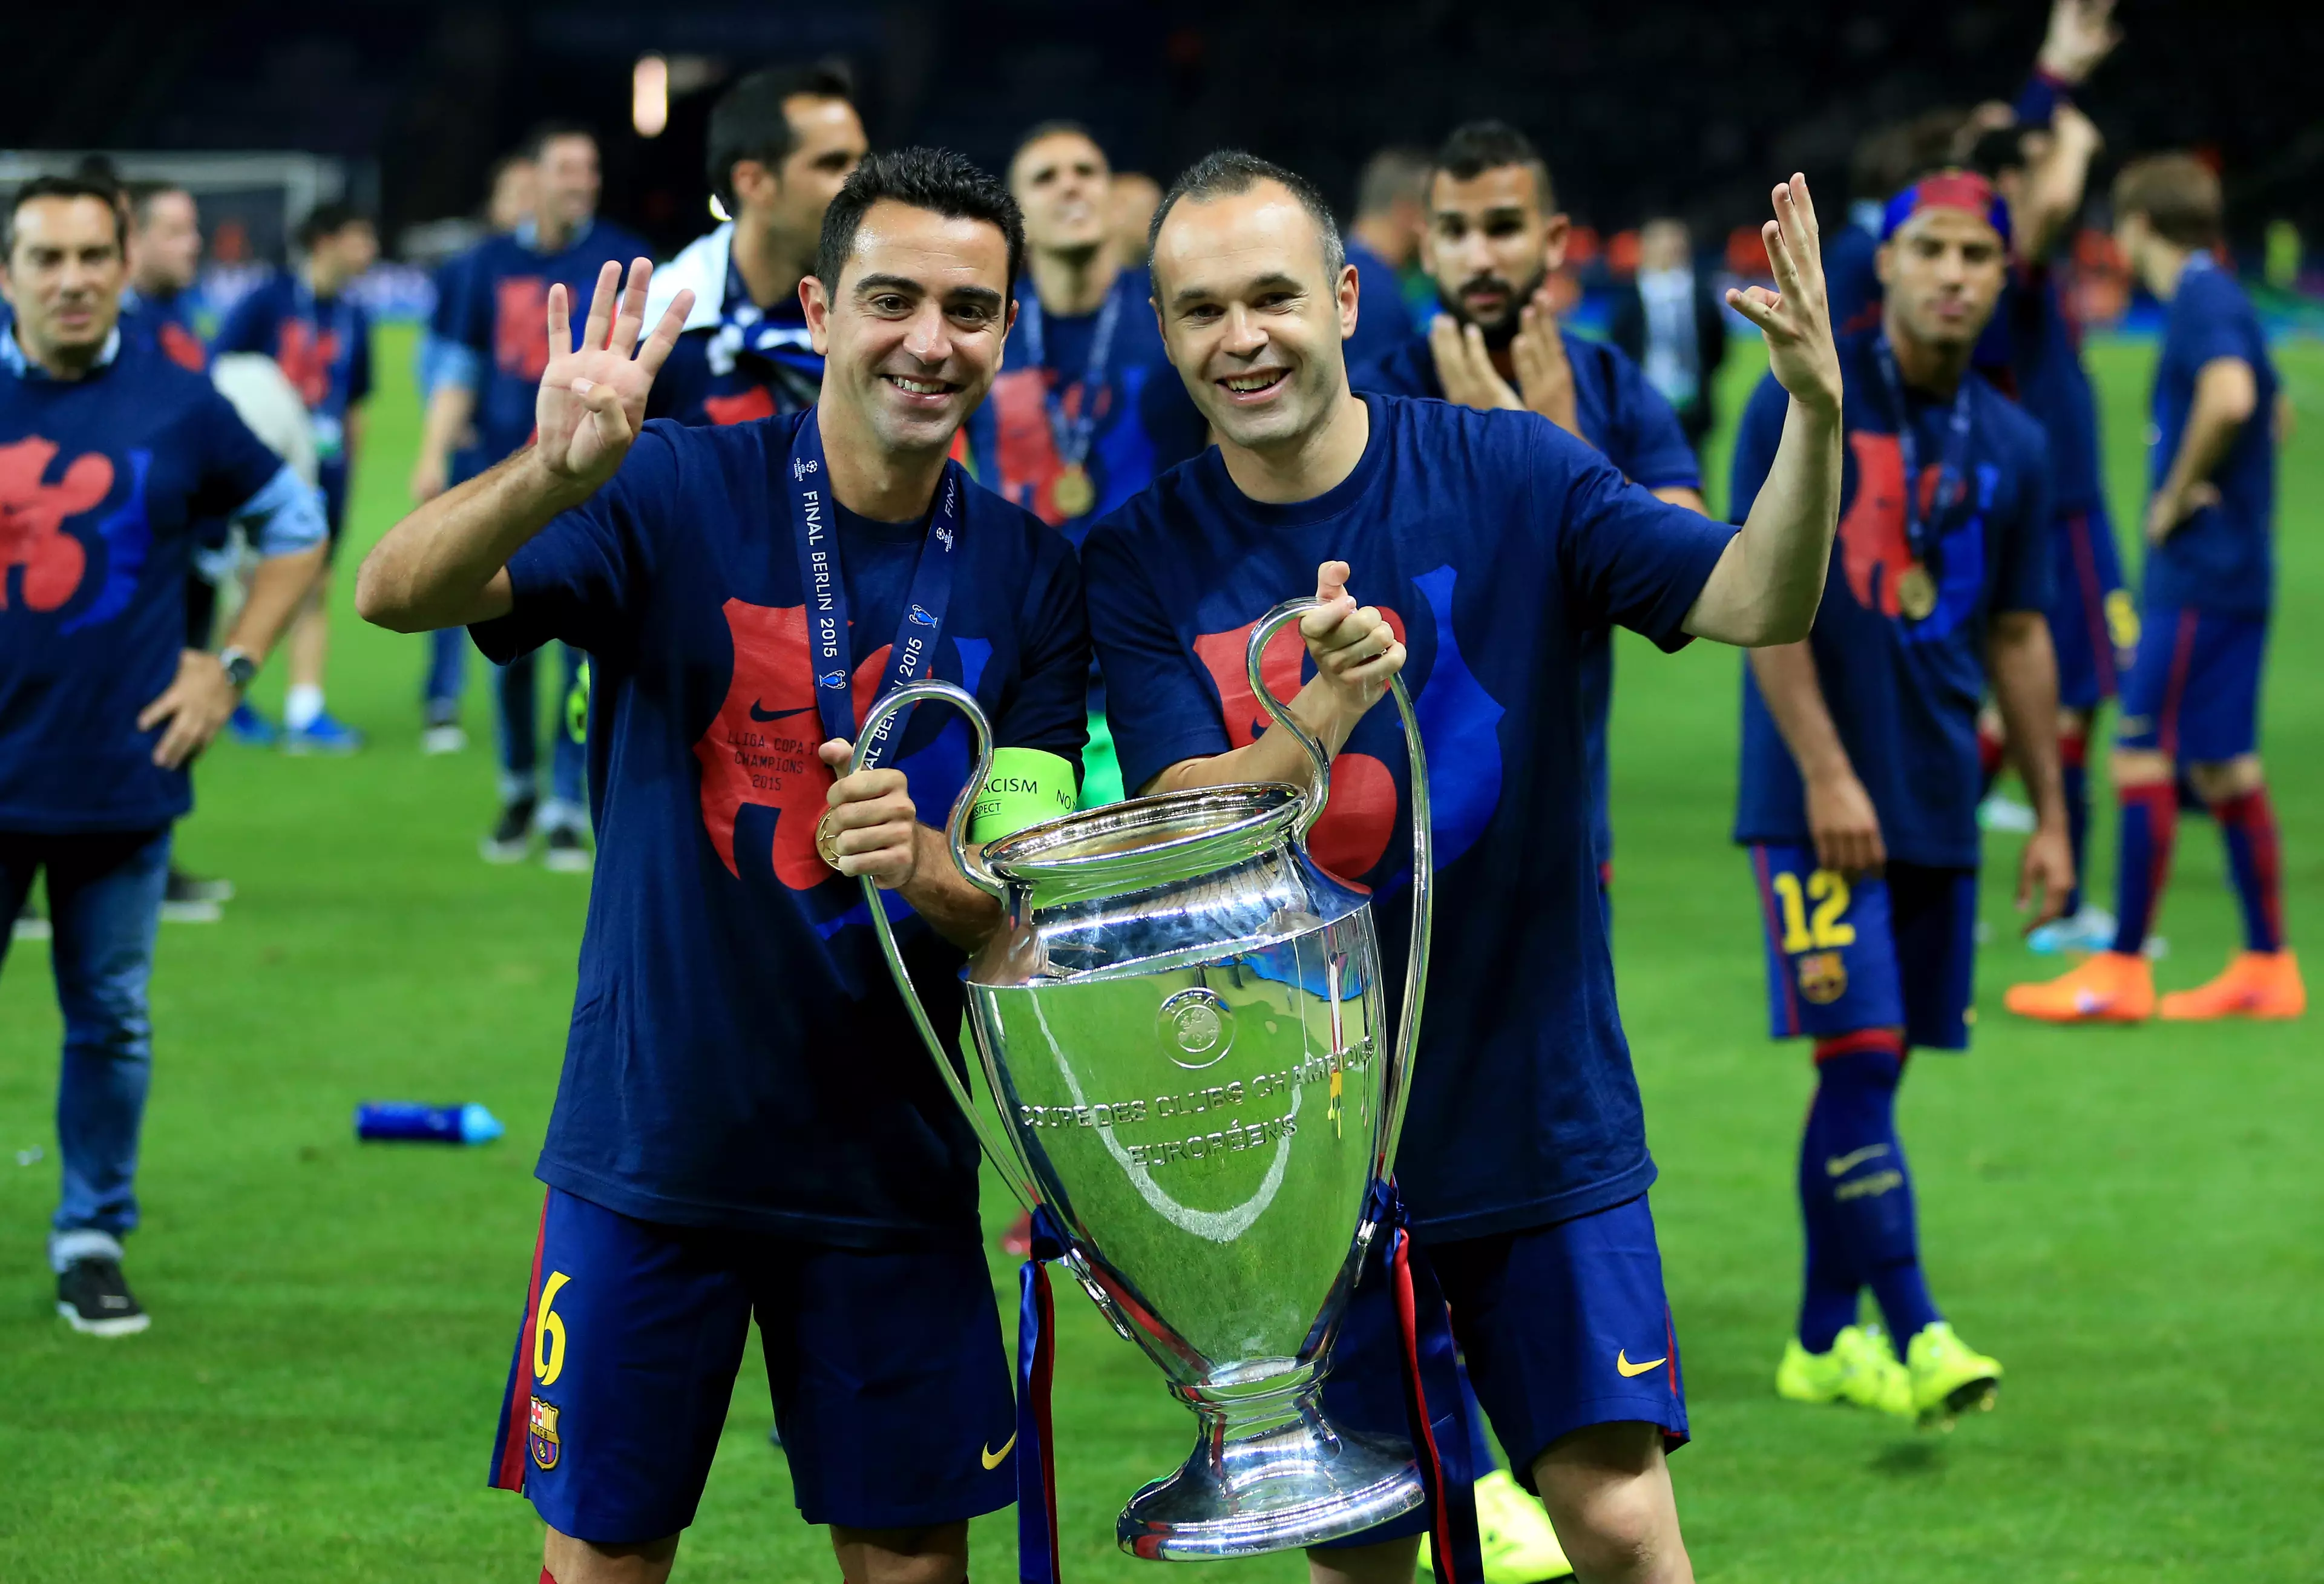 It's only right the Barca pair share the title with 29% each. Image: PA Images